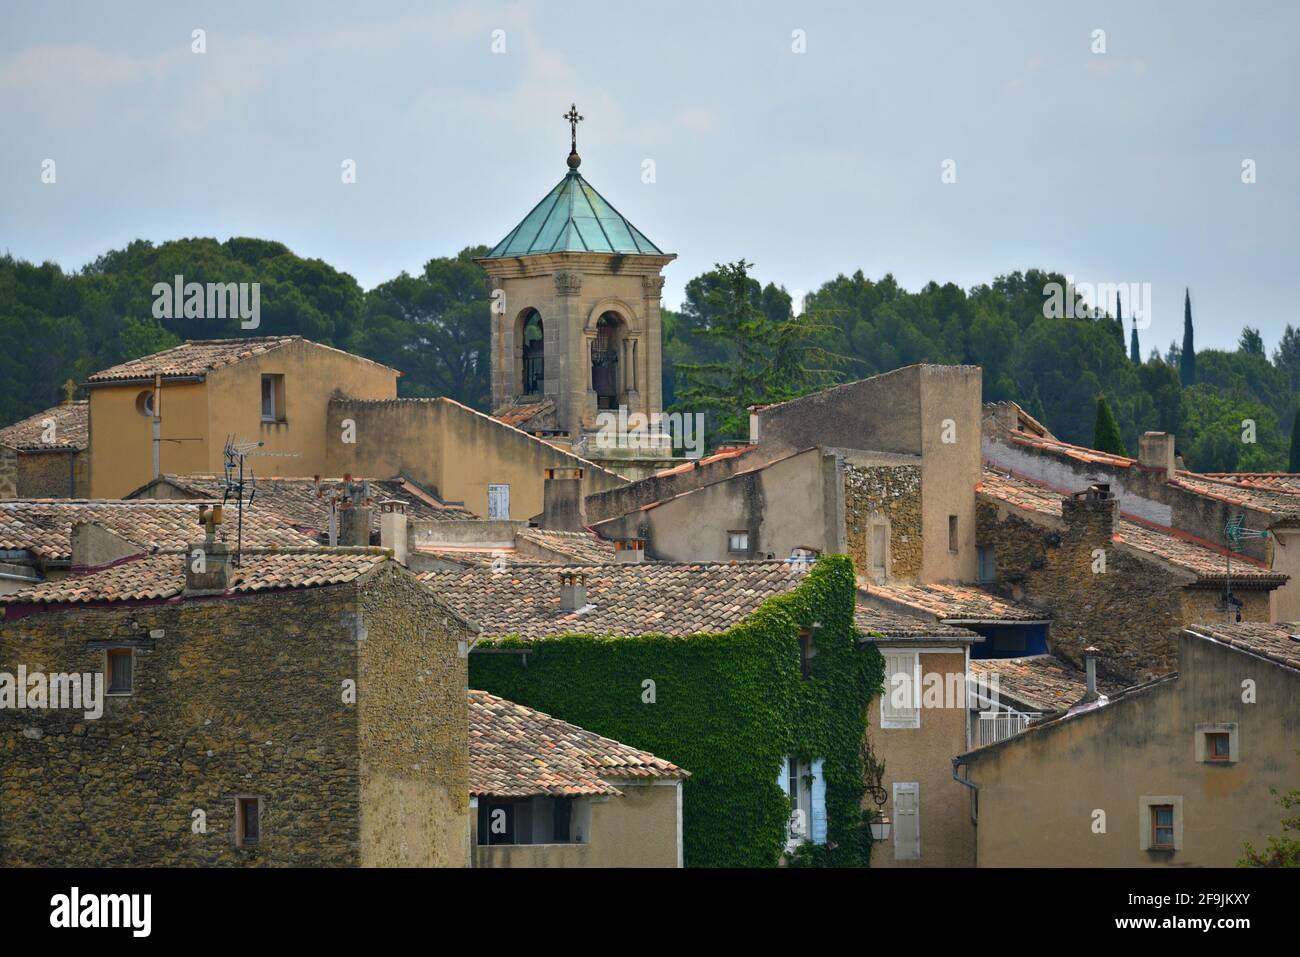 Landscape with  Provençal style clay tile rooftop houses in the picturesque village of Lourmarin in Vaucluse, Provence France. Stock Photo